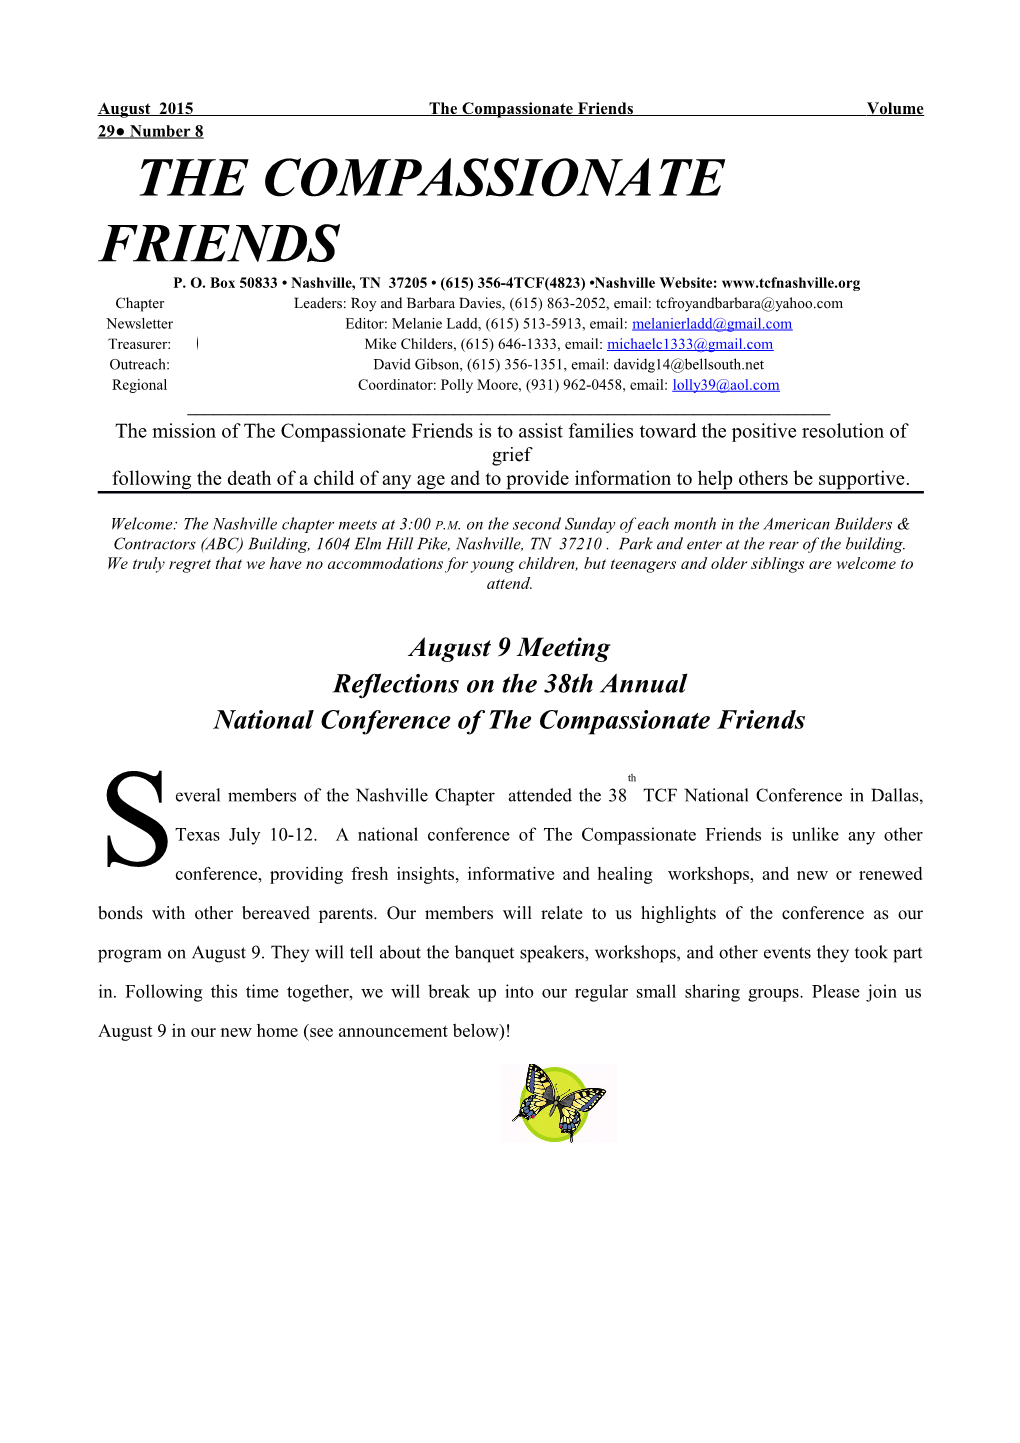 August 2015 the Compassionate Friends Volume 29 Number 8